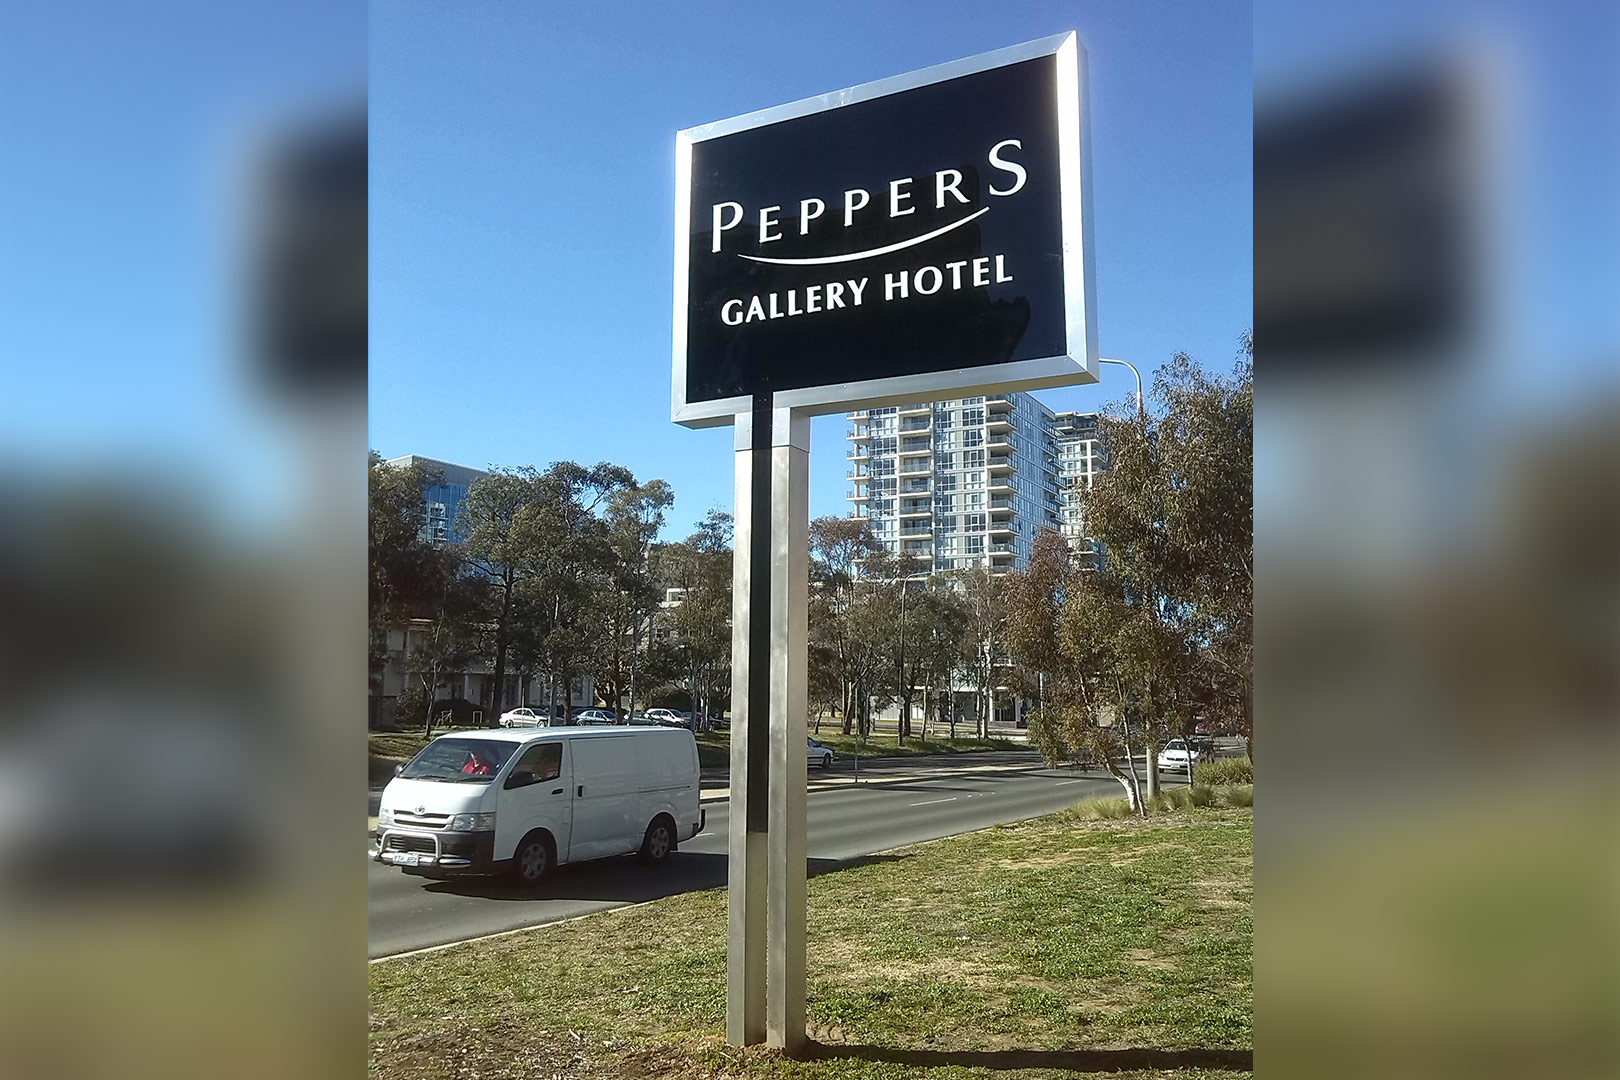  Peppers Gallery Hotel Canberra 